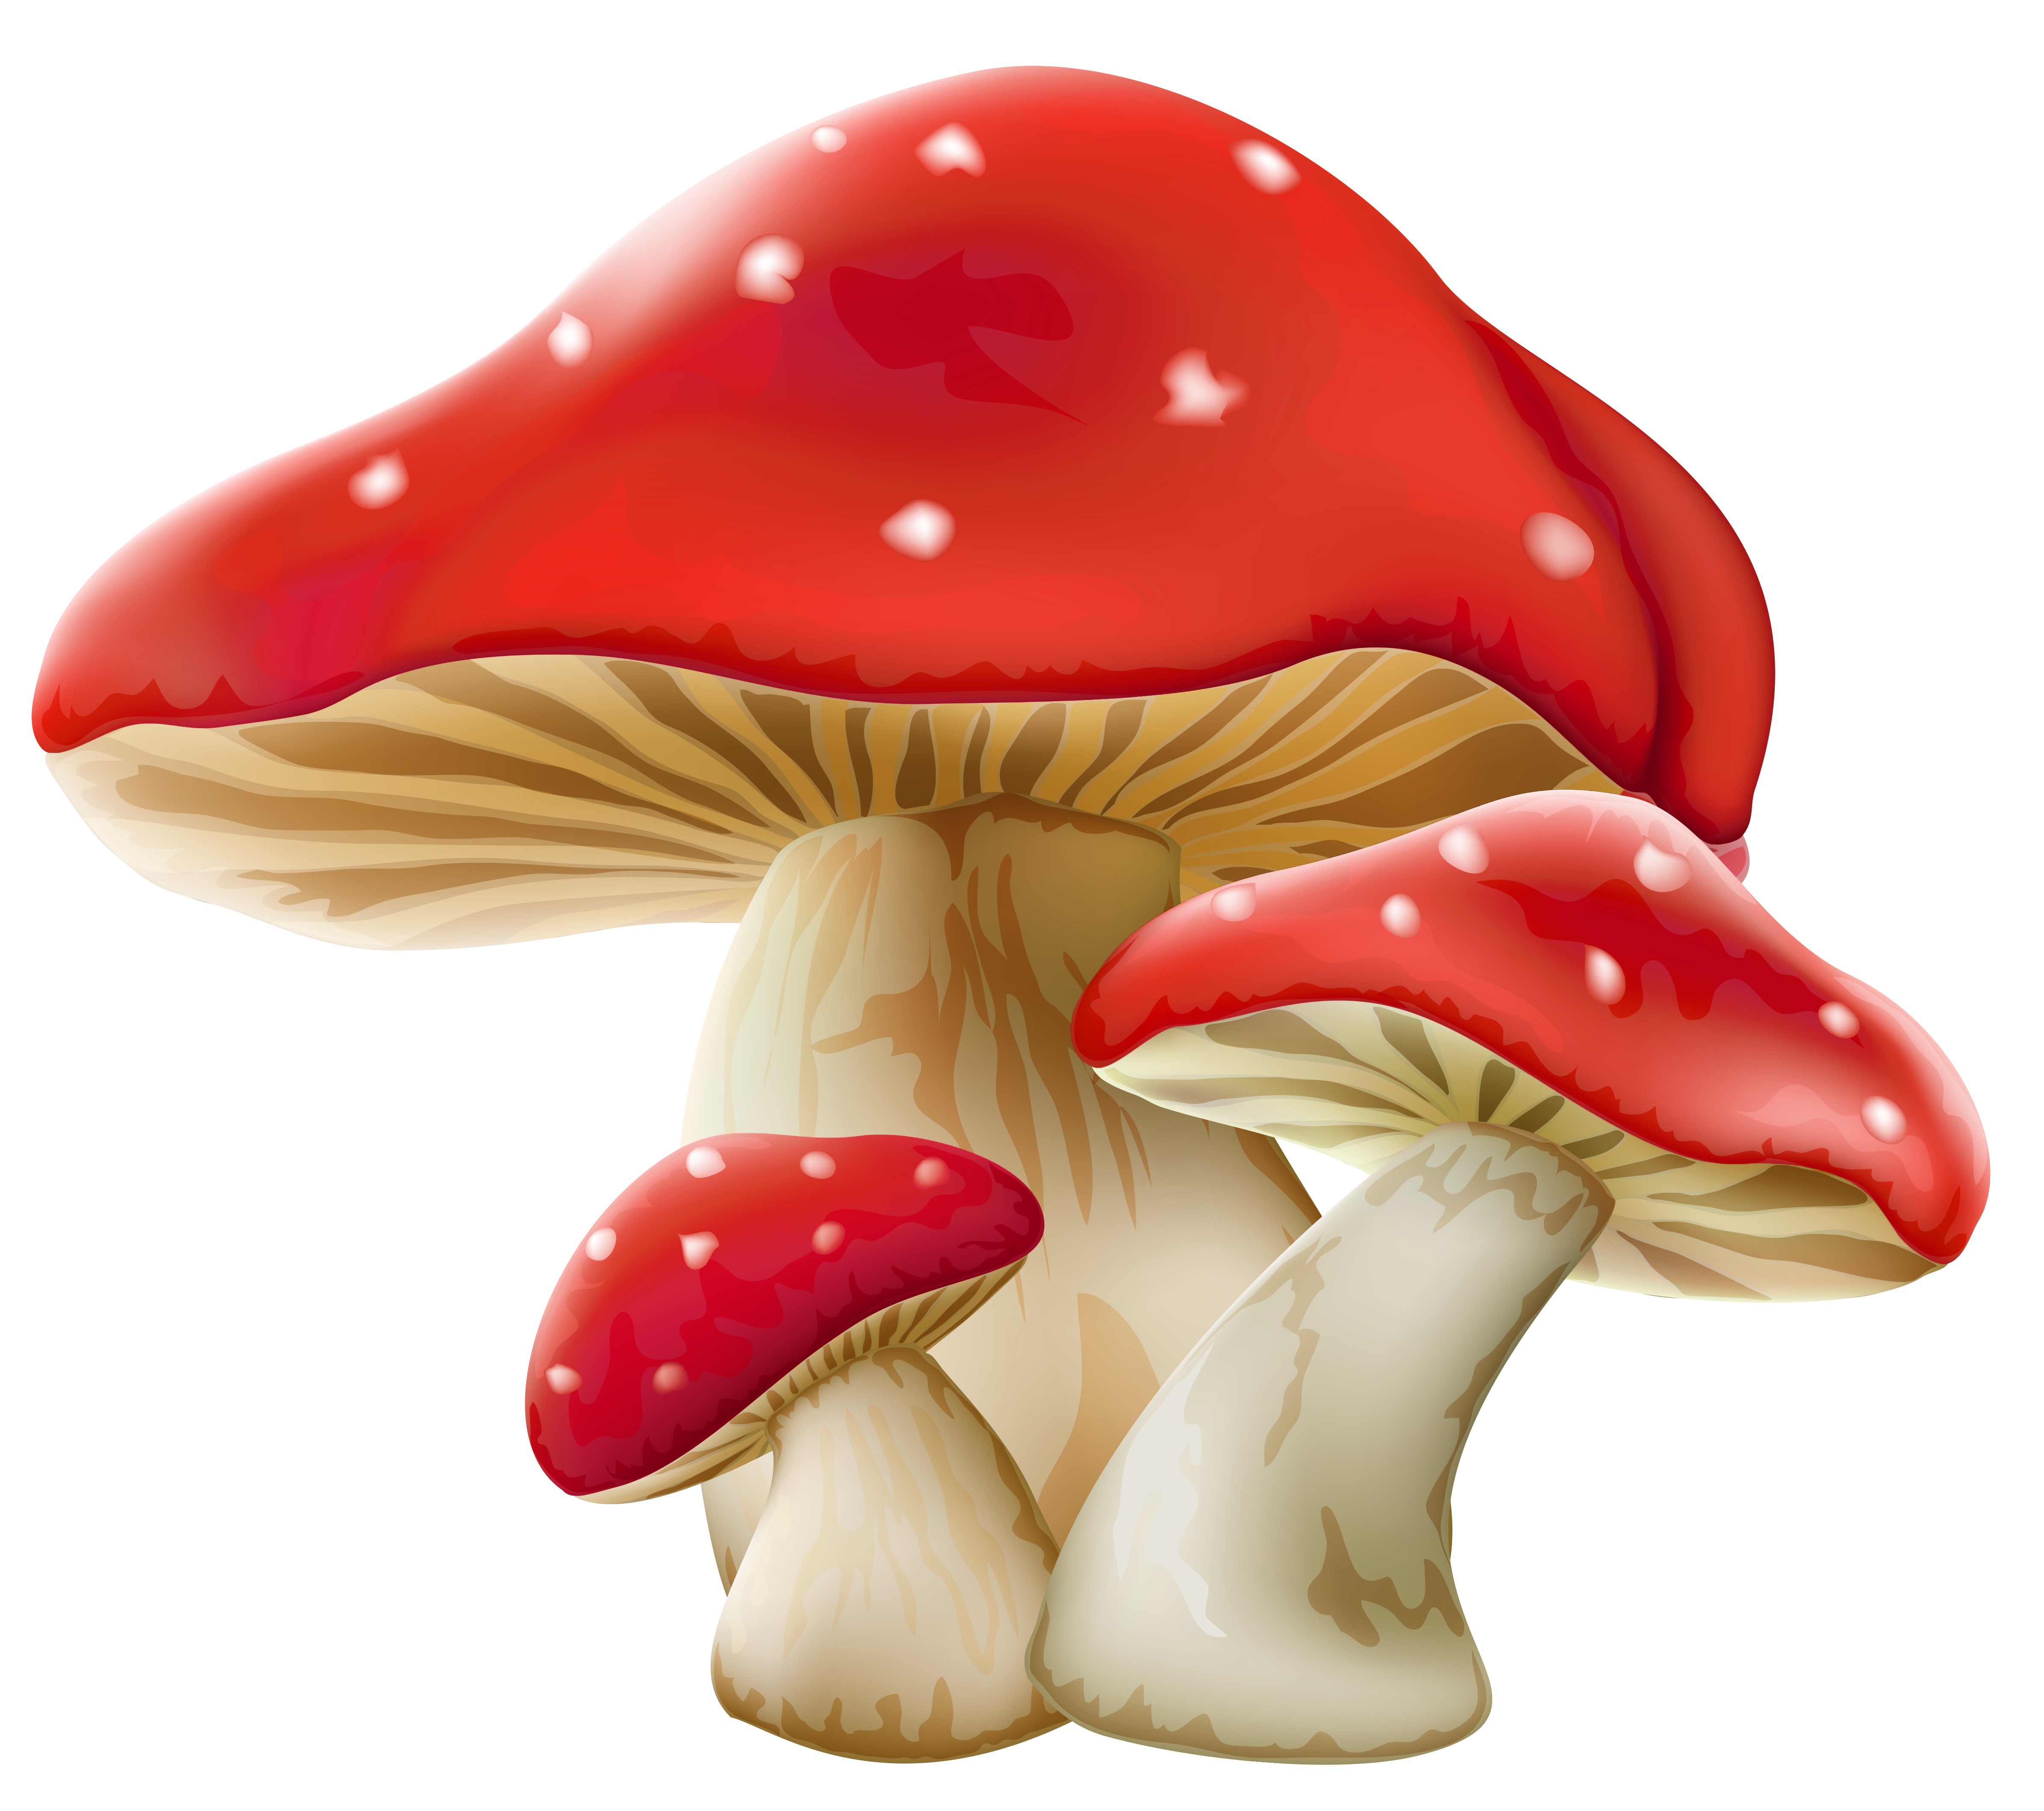 Png picture gallery yopriceville. Mushrooms clipart birthday